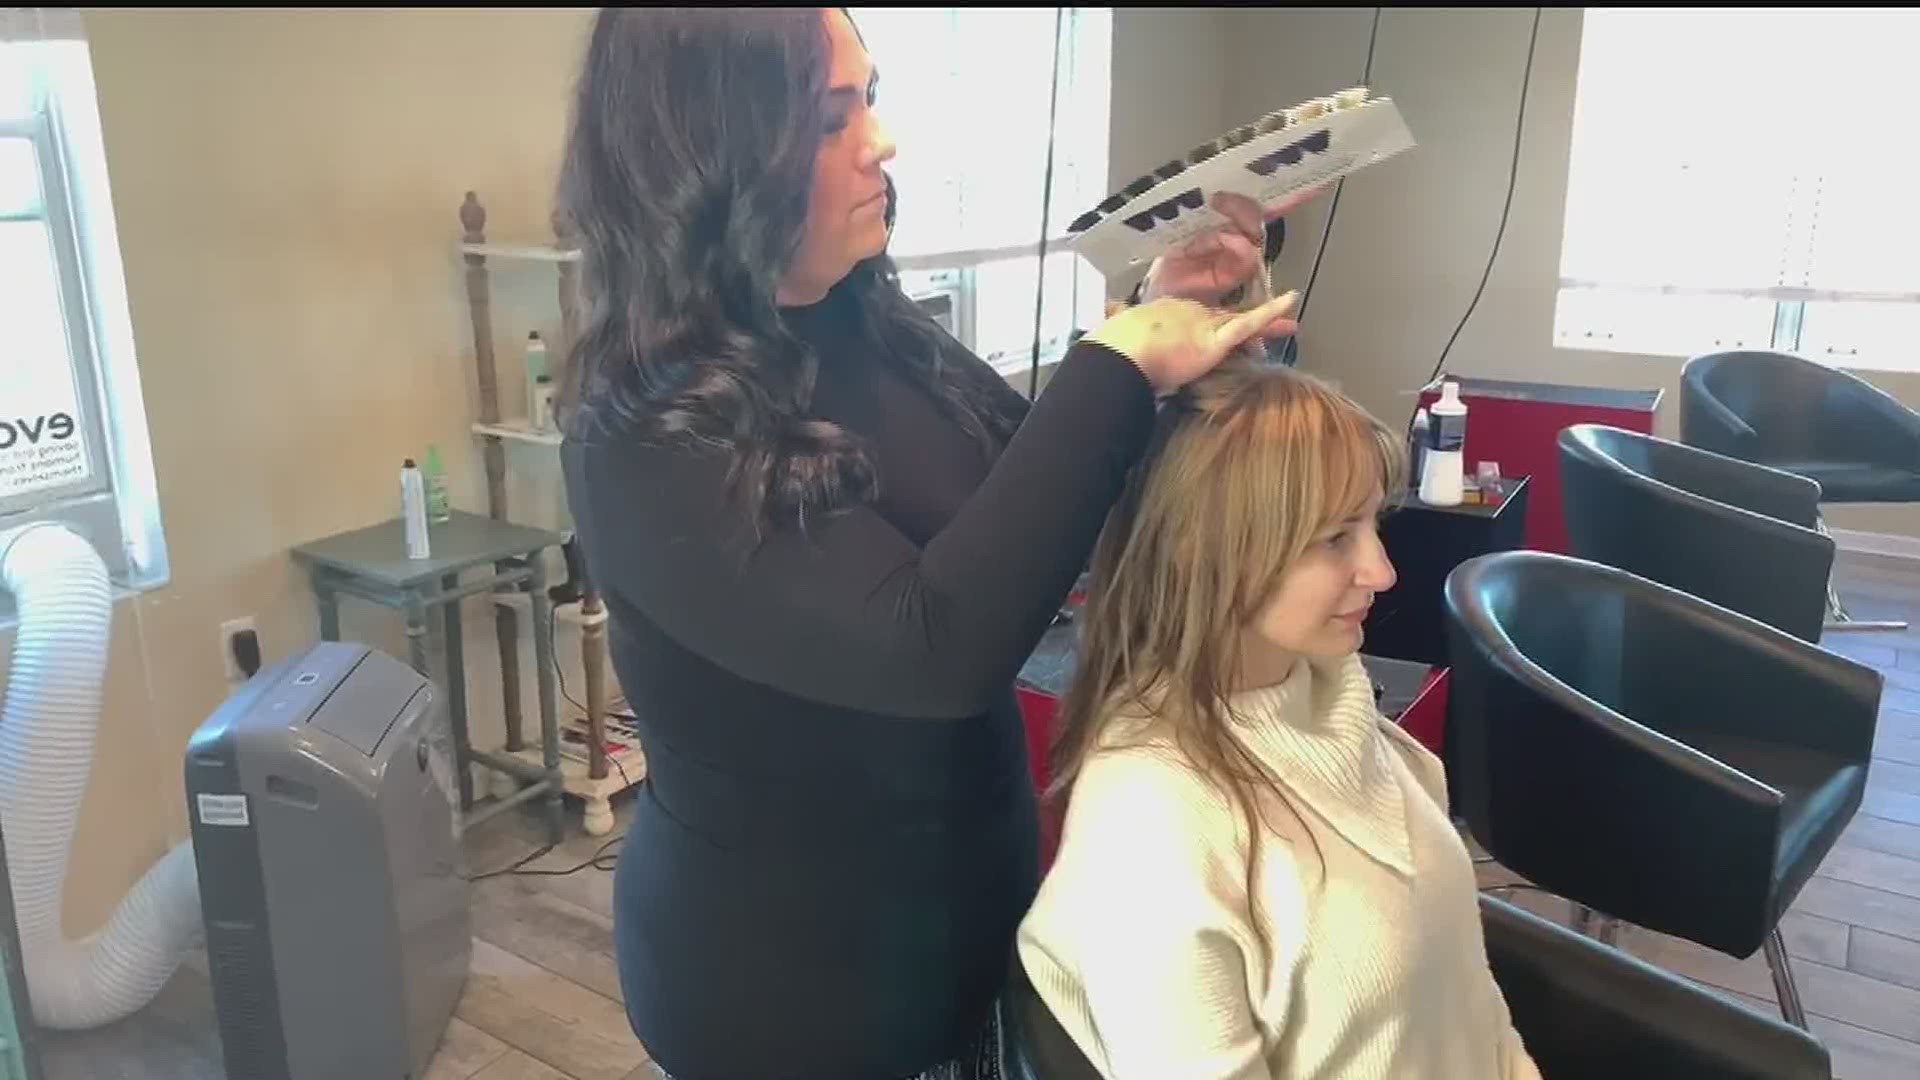 Two hairstylists in York County discuss how their profession is taking a hard hit as the Governor of PA mandates non-essential business closures.